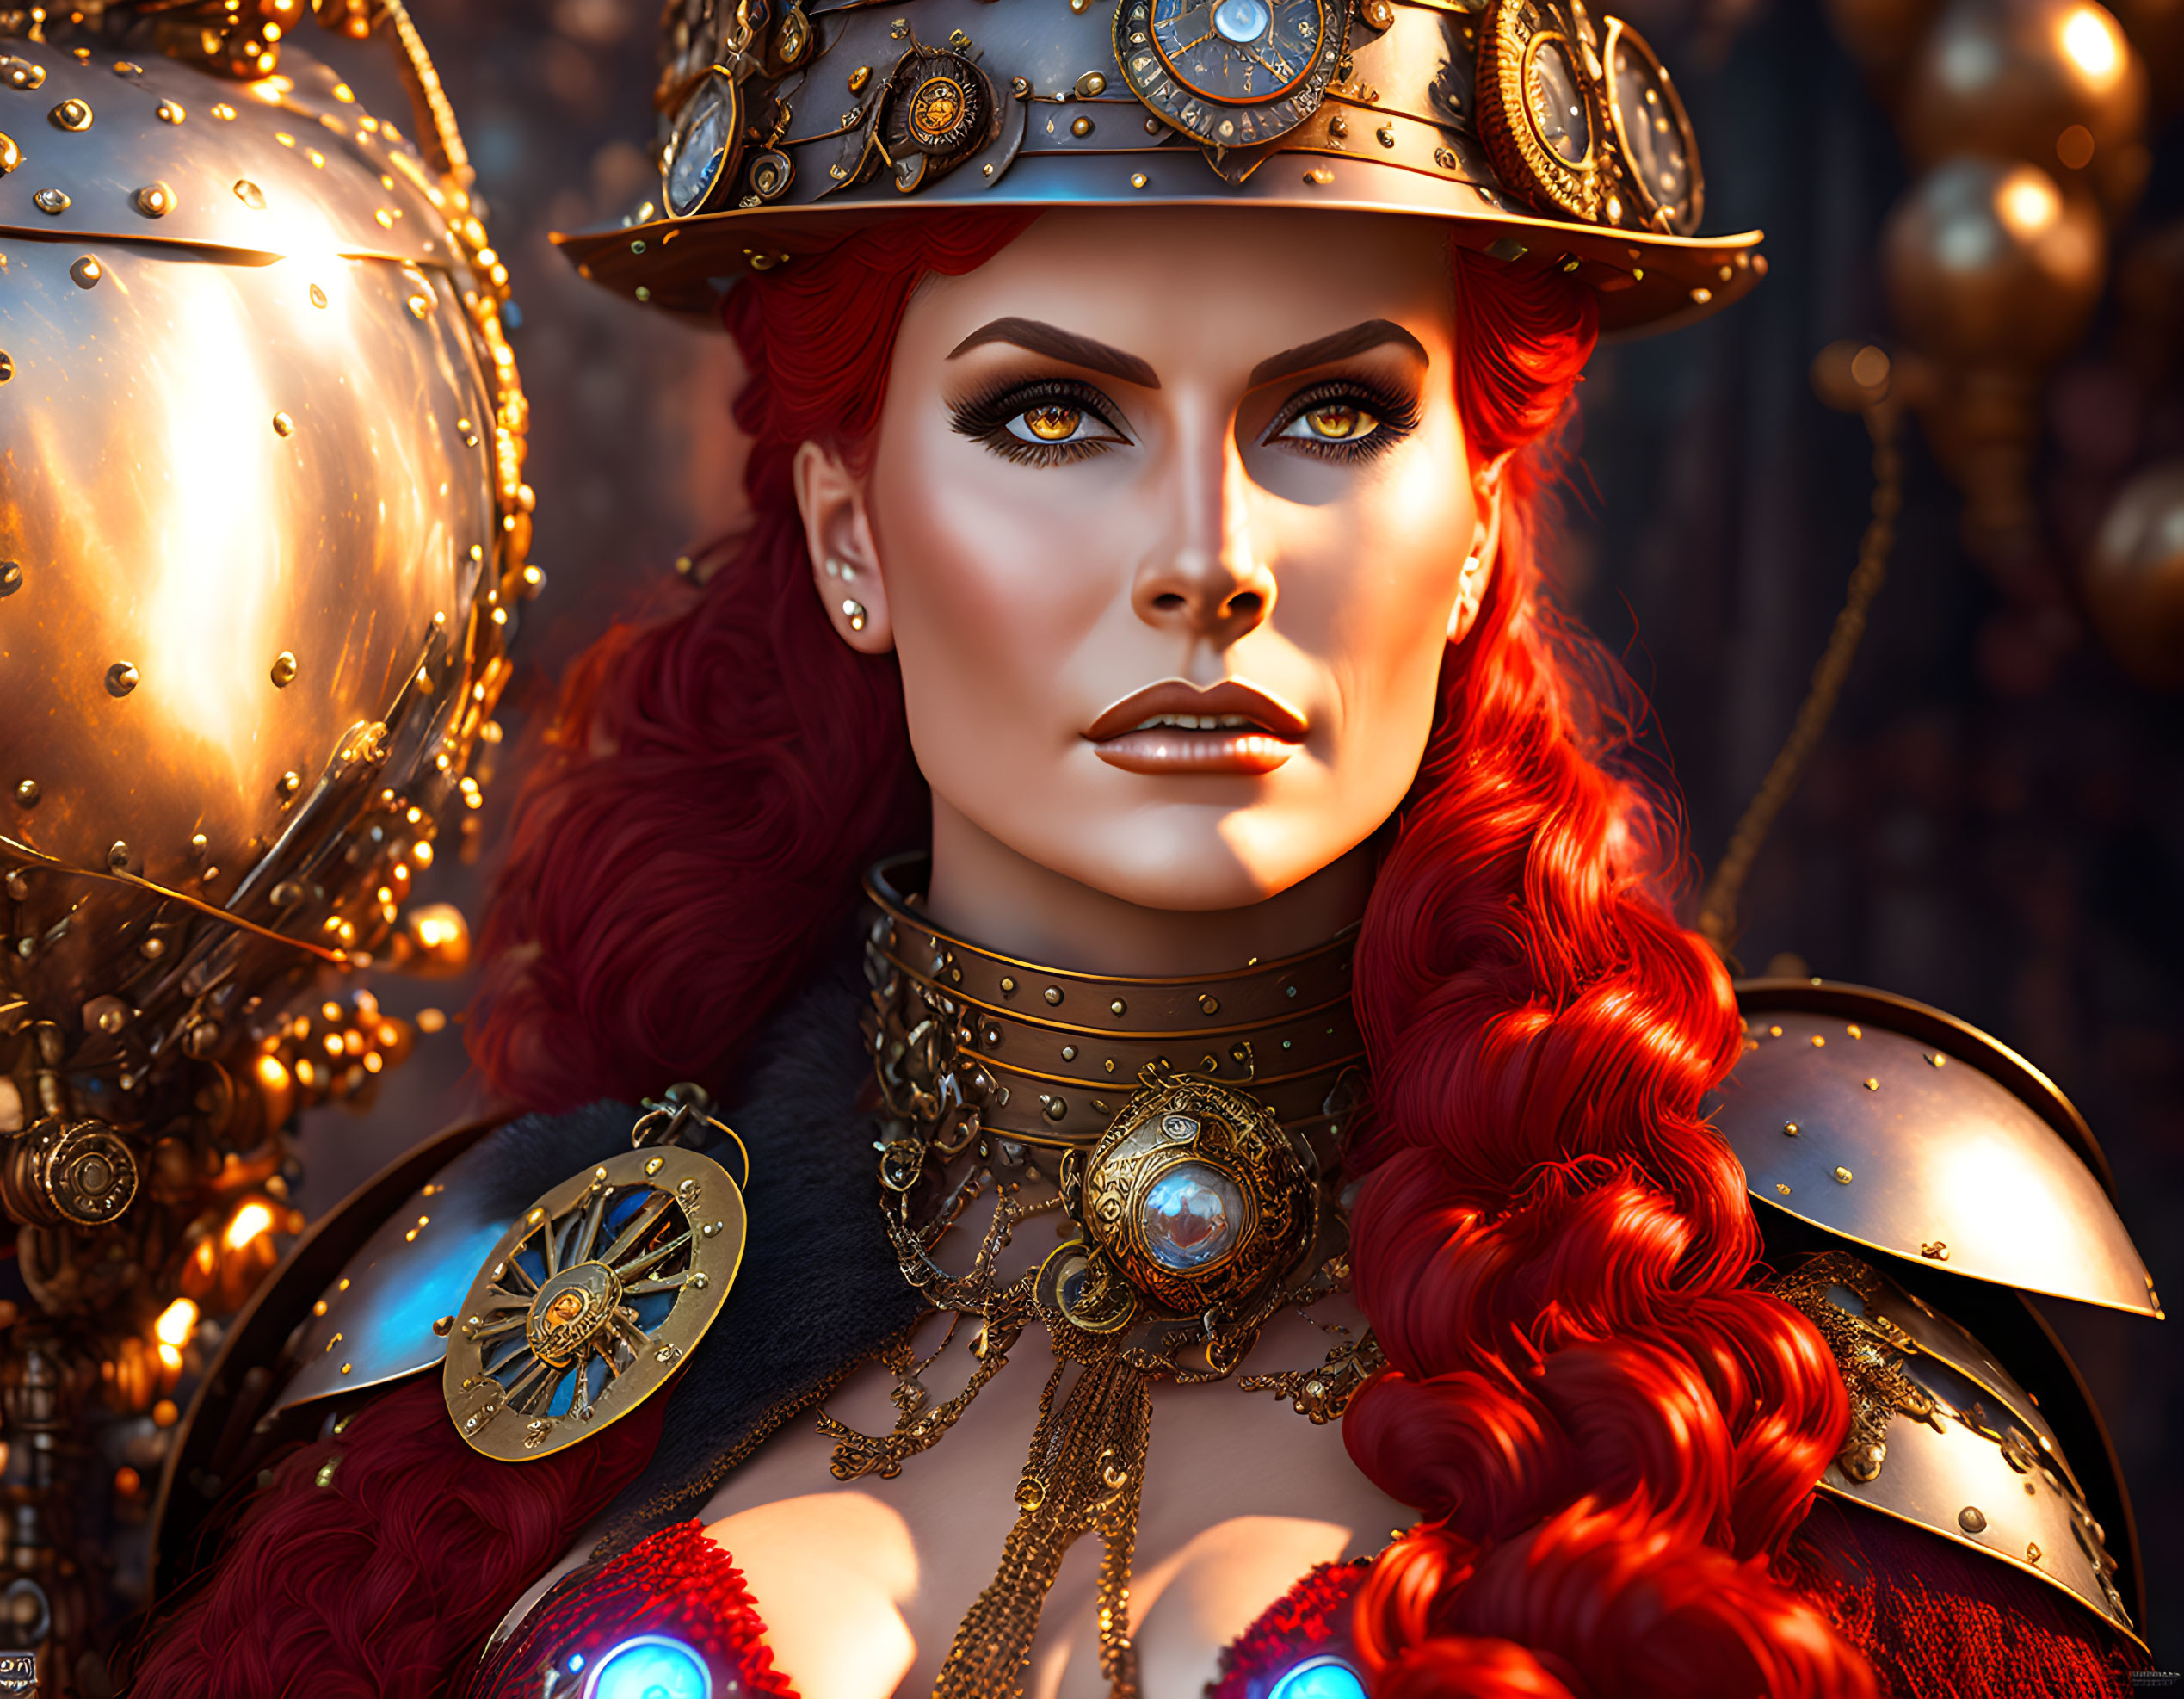 Detailed Illustration: Woman with Red Hair & Blue Eyes in Steampunk Armor